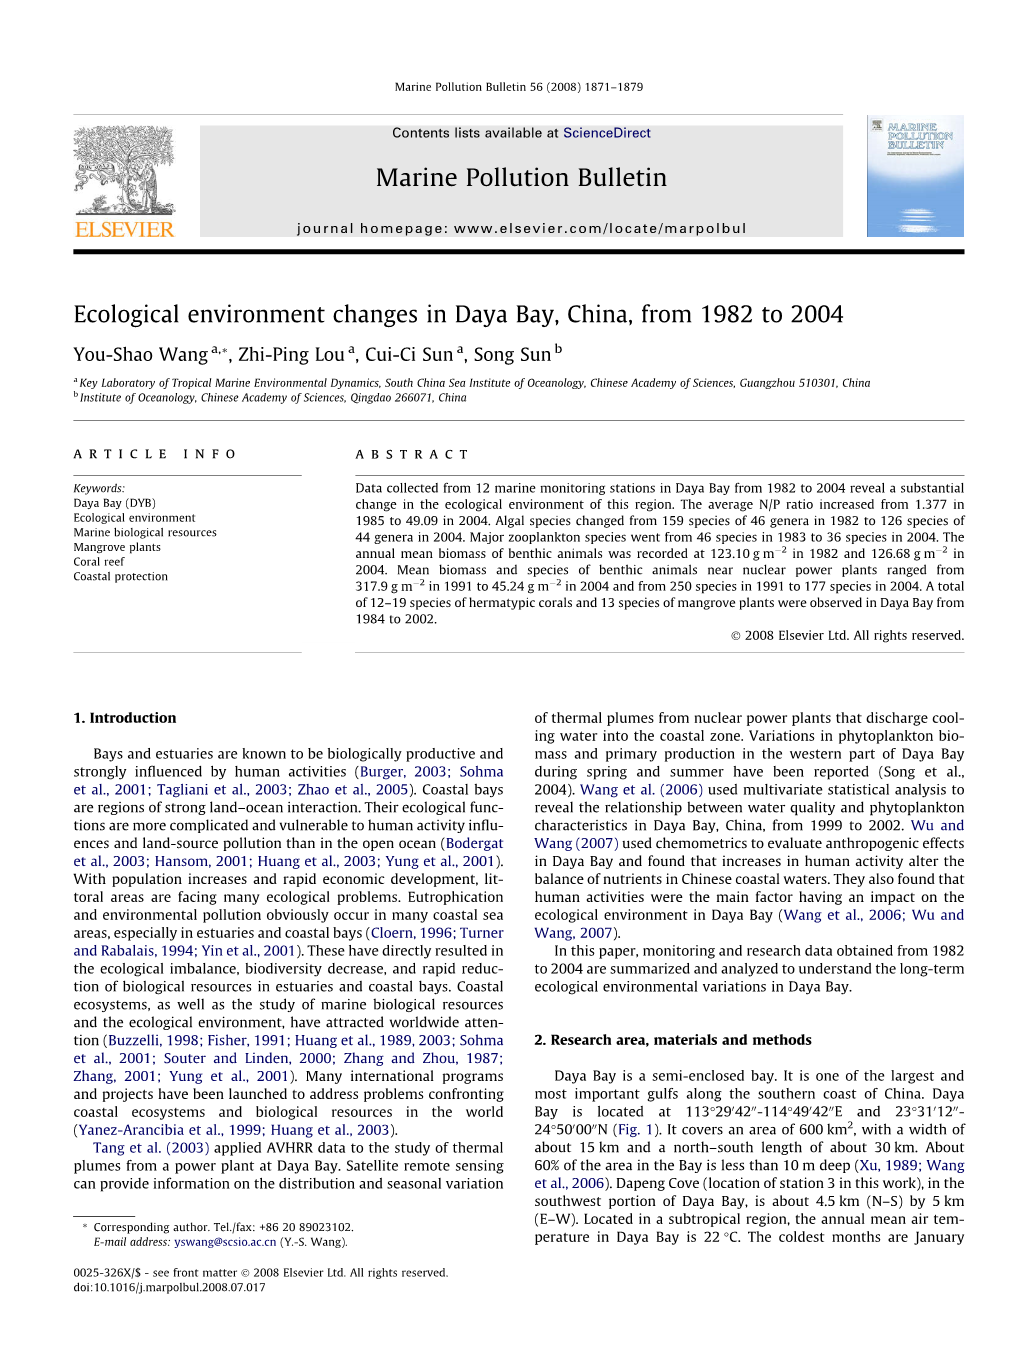 Ecological Environment Changes in Daya Bay, China, from 1982 to 2004